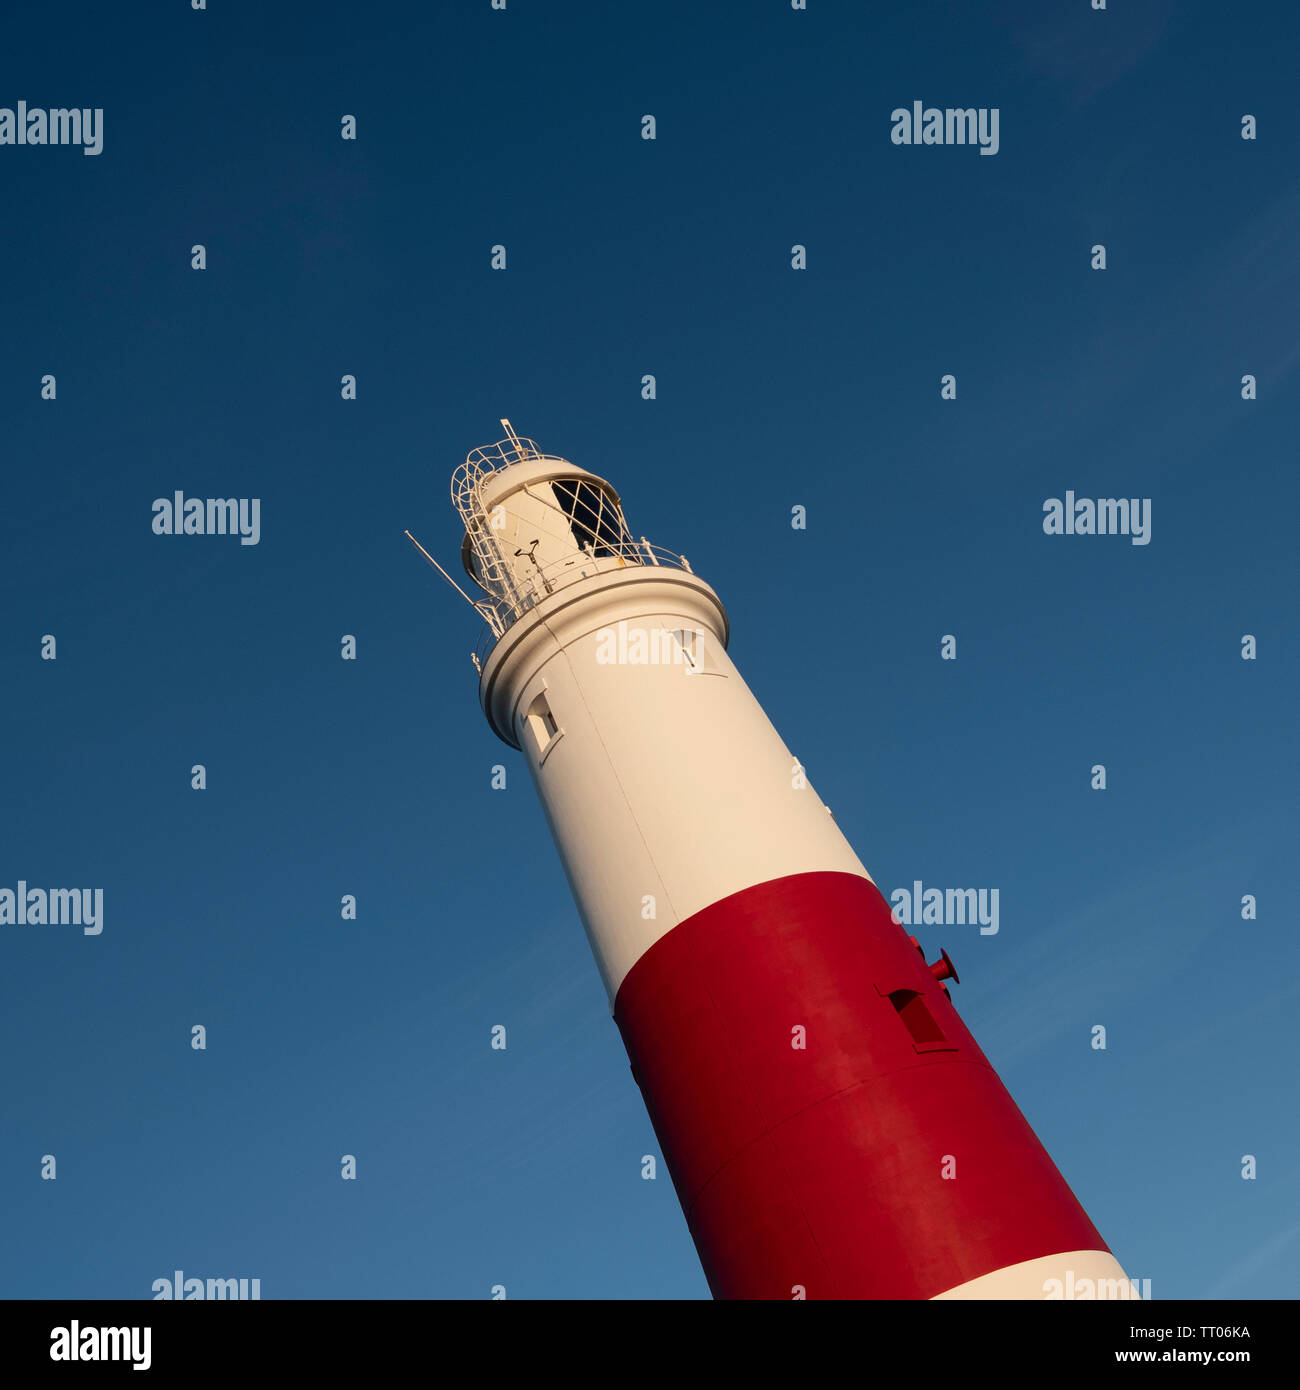 A white and red Portland Bill Lighthouse on a blue sky square background Stock Photo